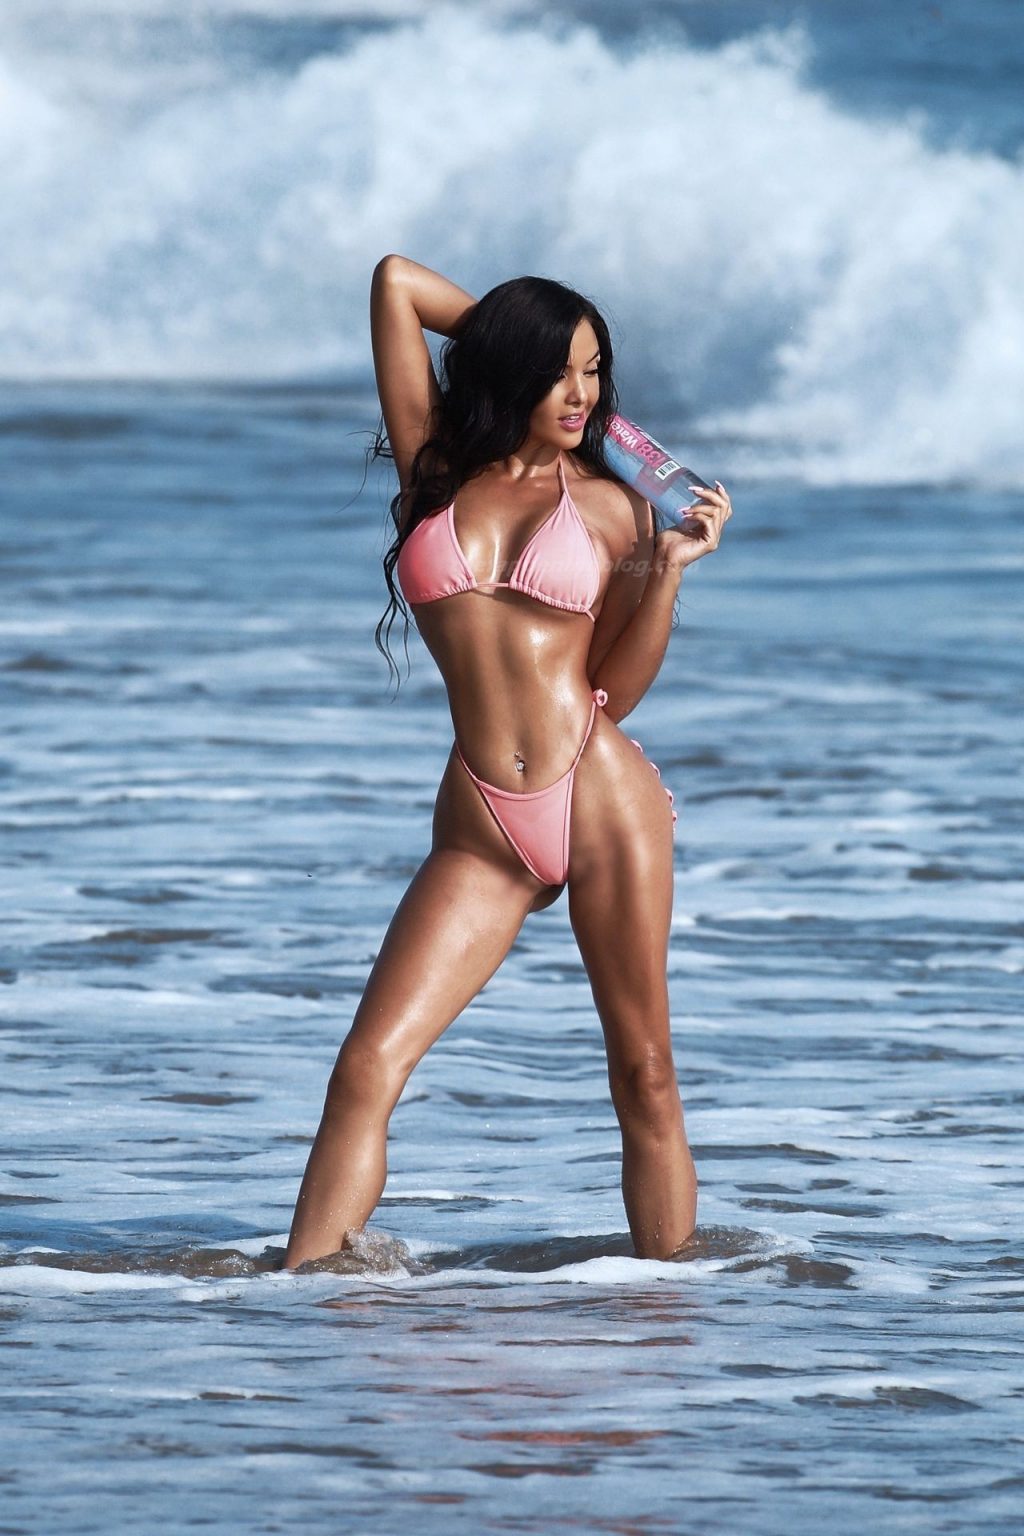 Val Fit Shows Off Her Sexy Beach Body in a Tiny Pink Bikini (46 Photos)